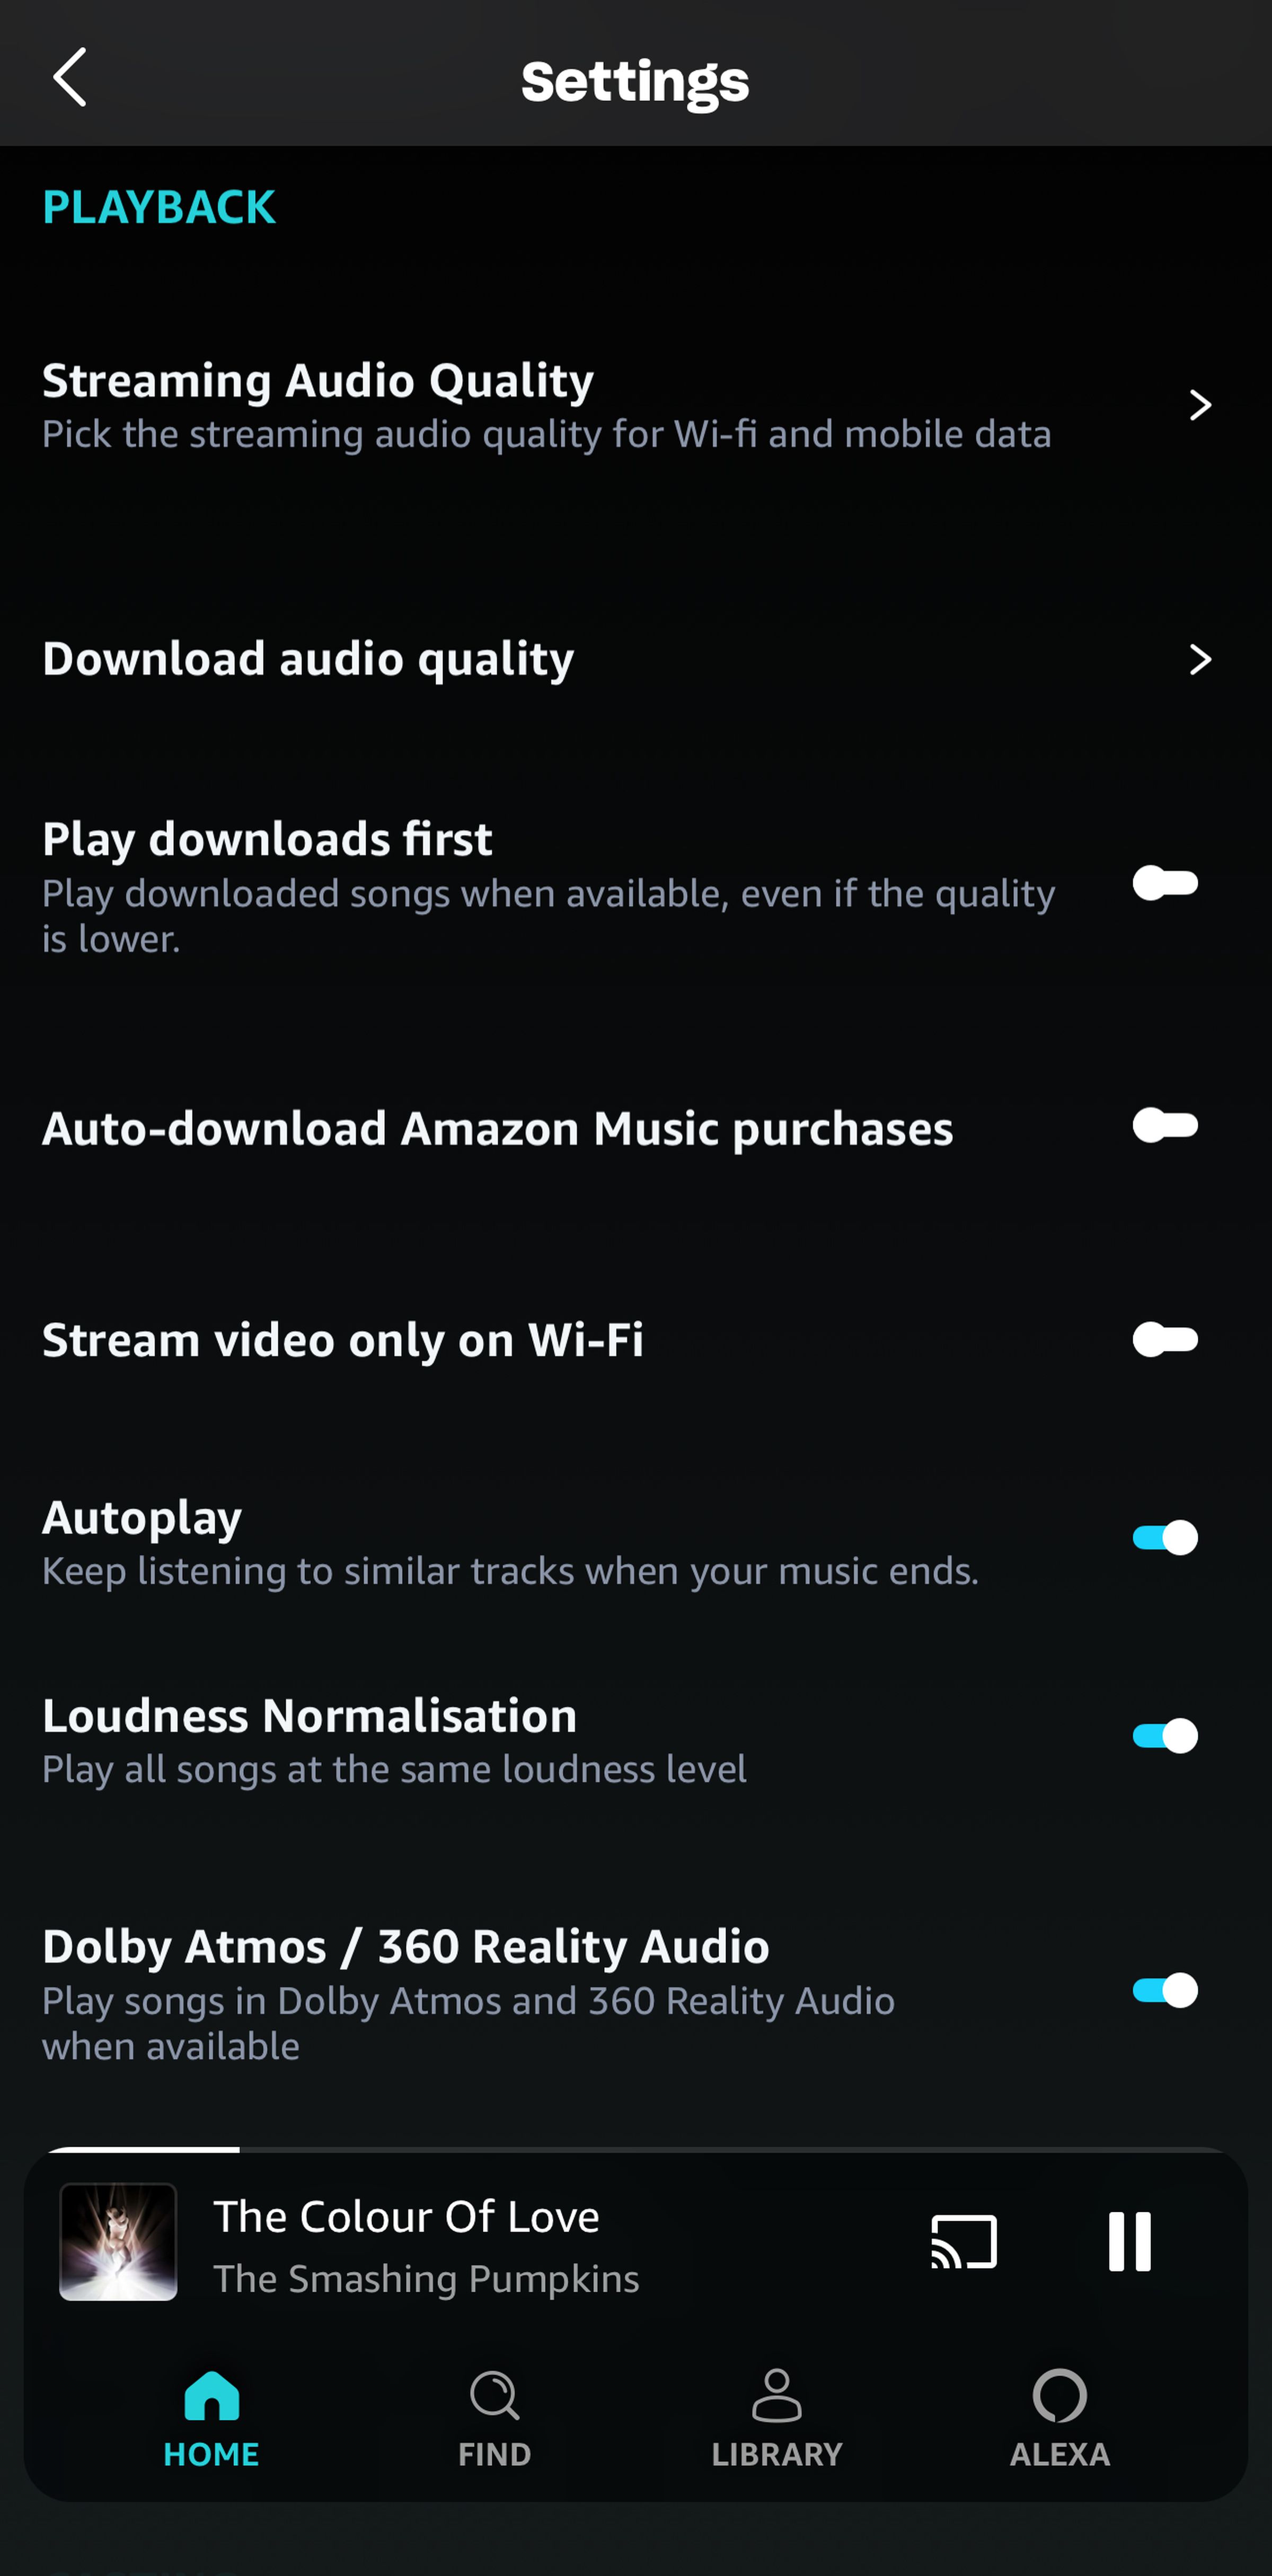 Settings page for Amazon Music.